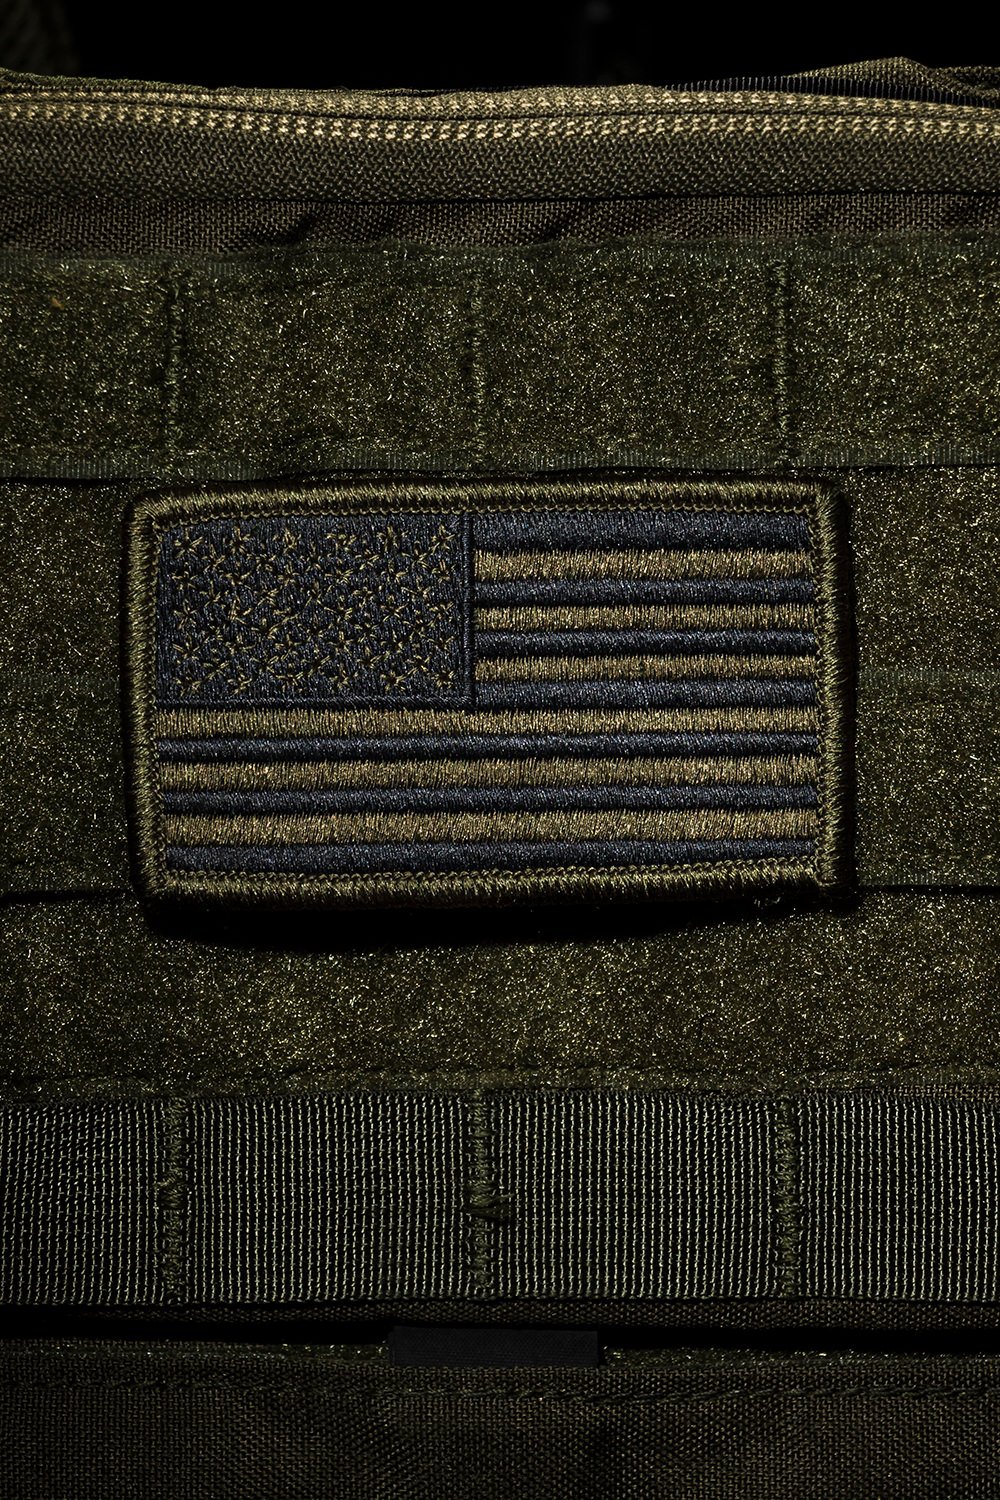 OD Green Military American Flag Morale Patch – Nine Line Apparel